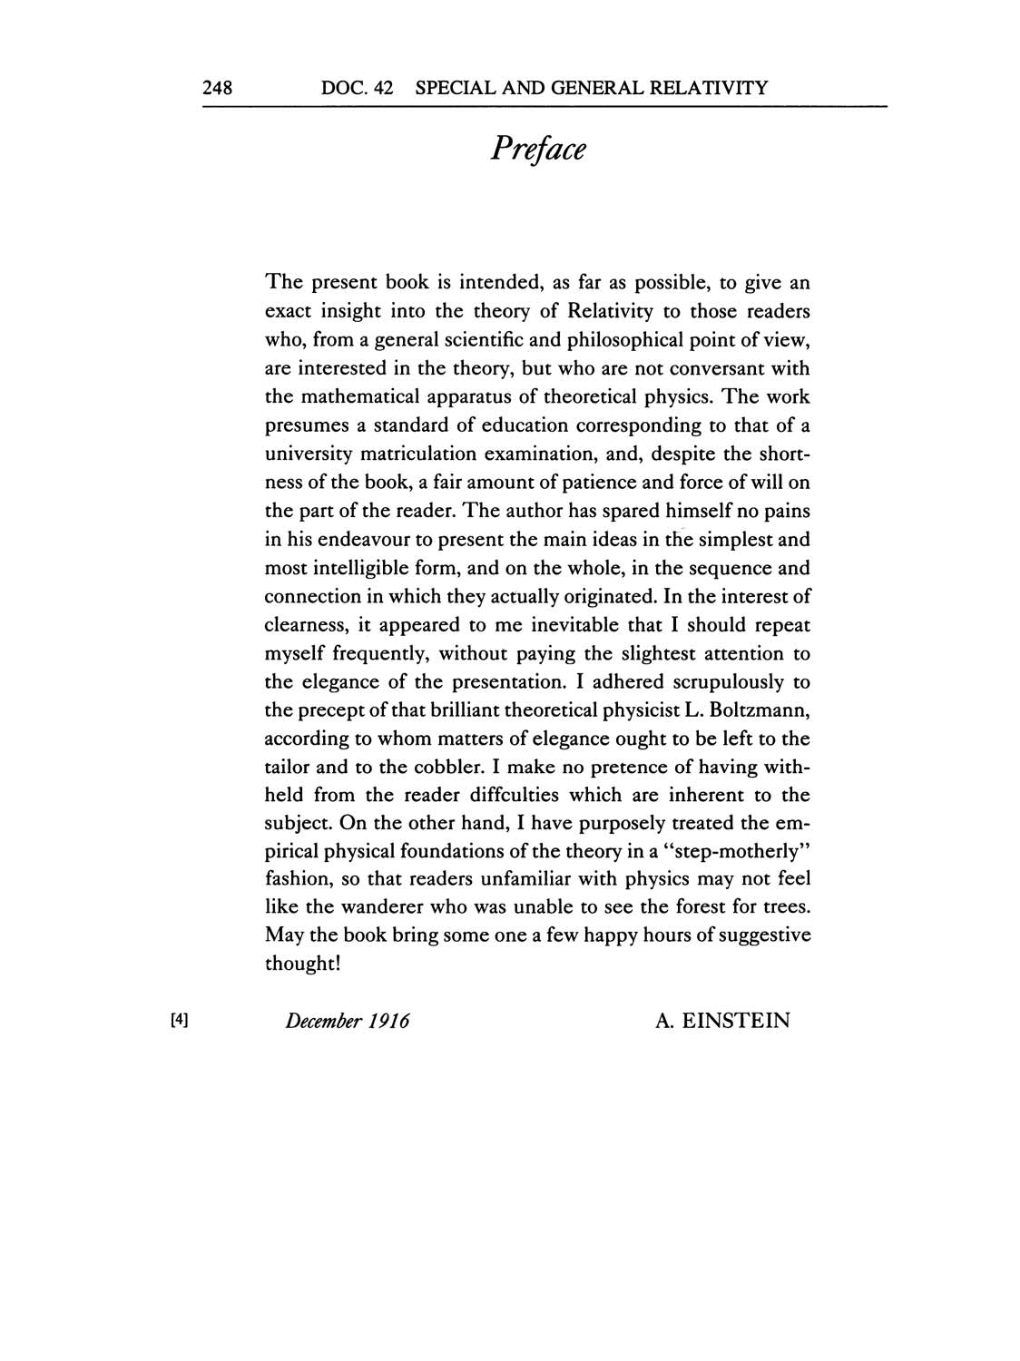 Volume 6: The Berlin Years: Writings, 1914-1917 (English translation supplement) page 248